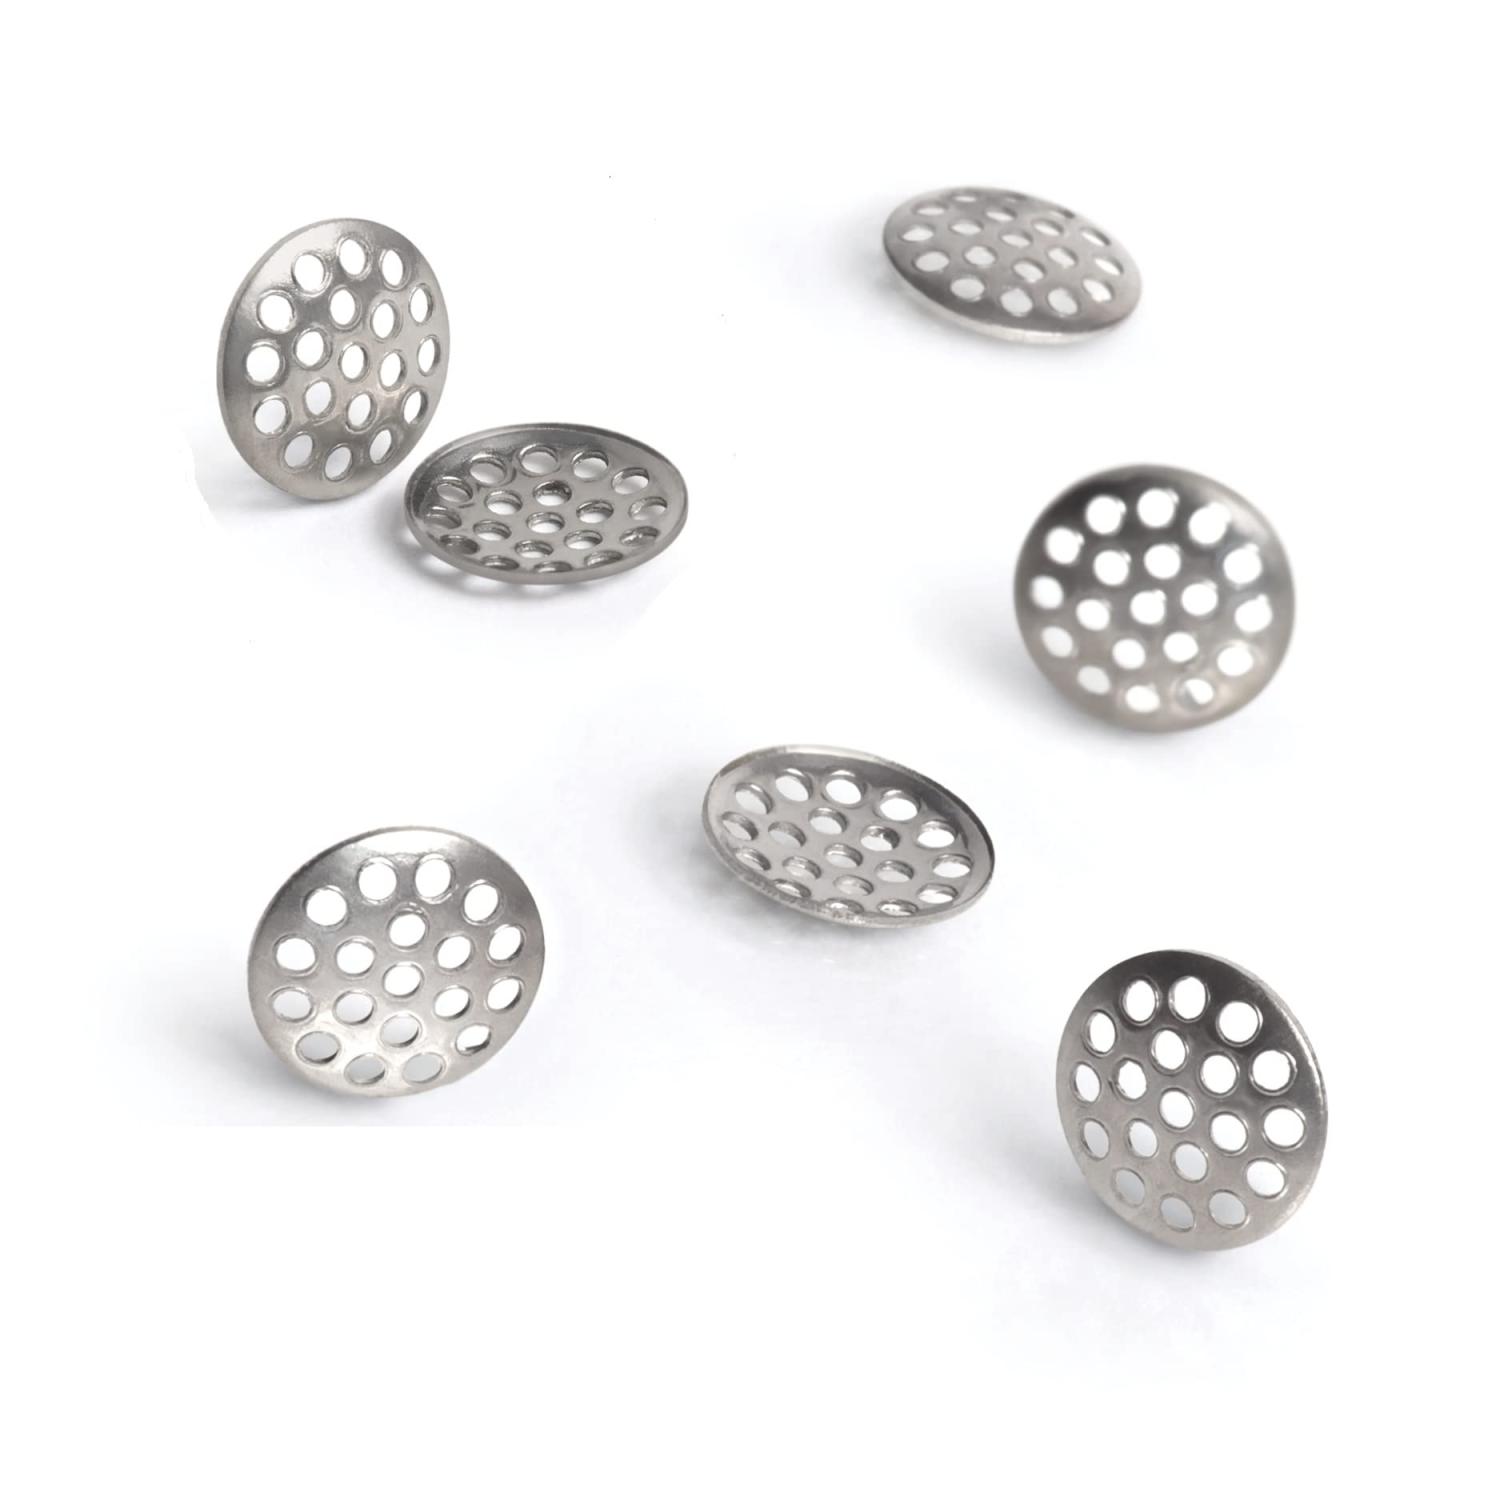  8mm (.313 Inch) Titanium Rigid Concave Filter - Utility Screens  (5 Pack) : Health & Household